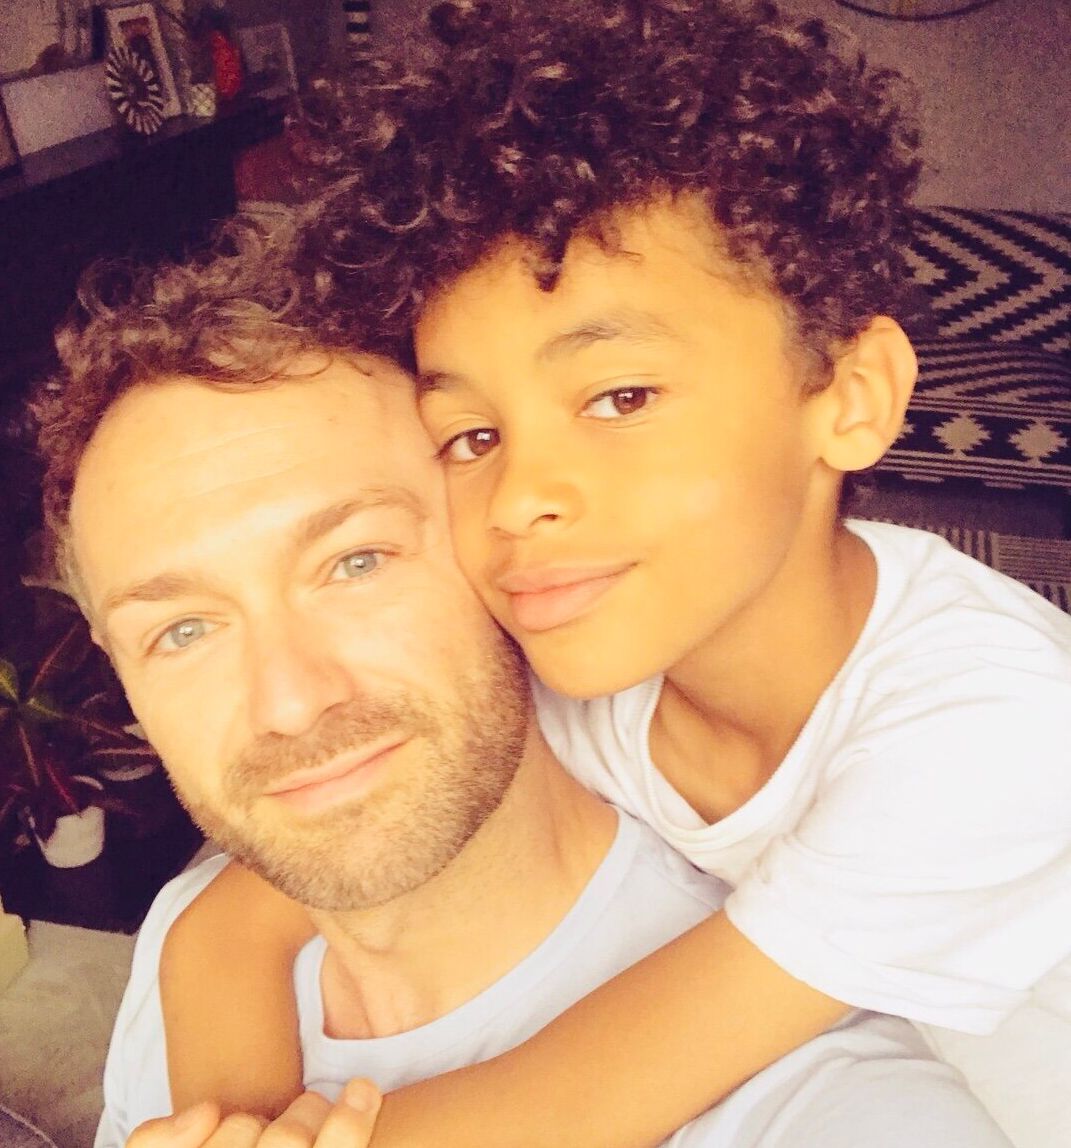 Single dad Ben Brooks-Dutton and his son